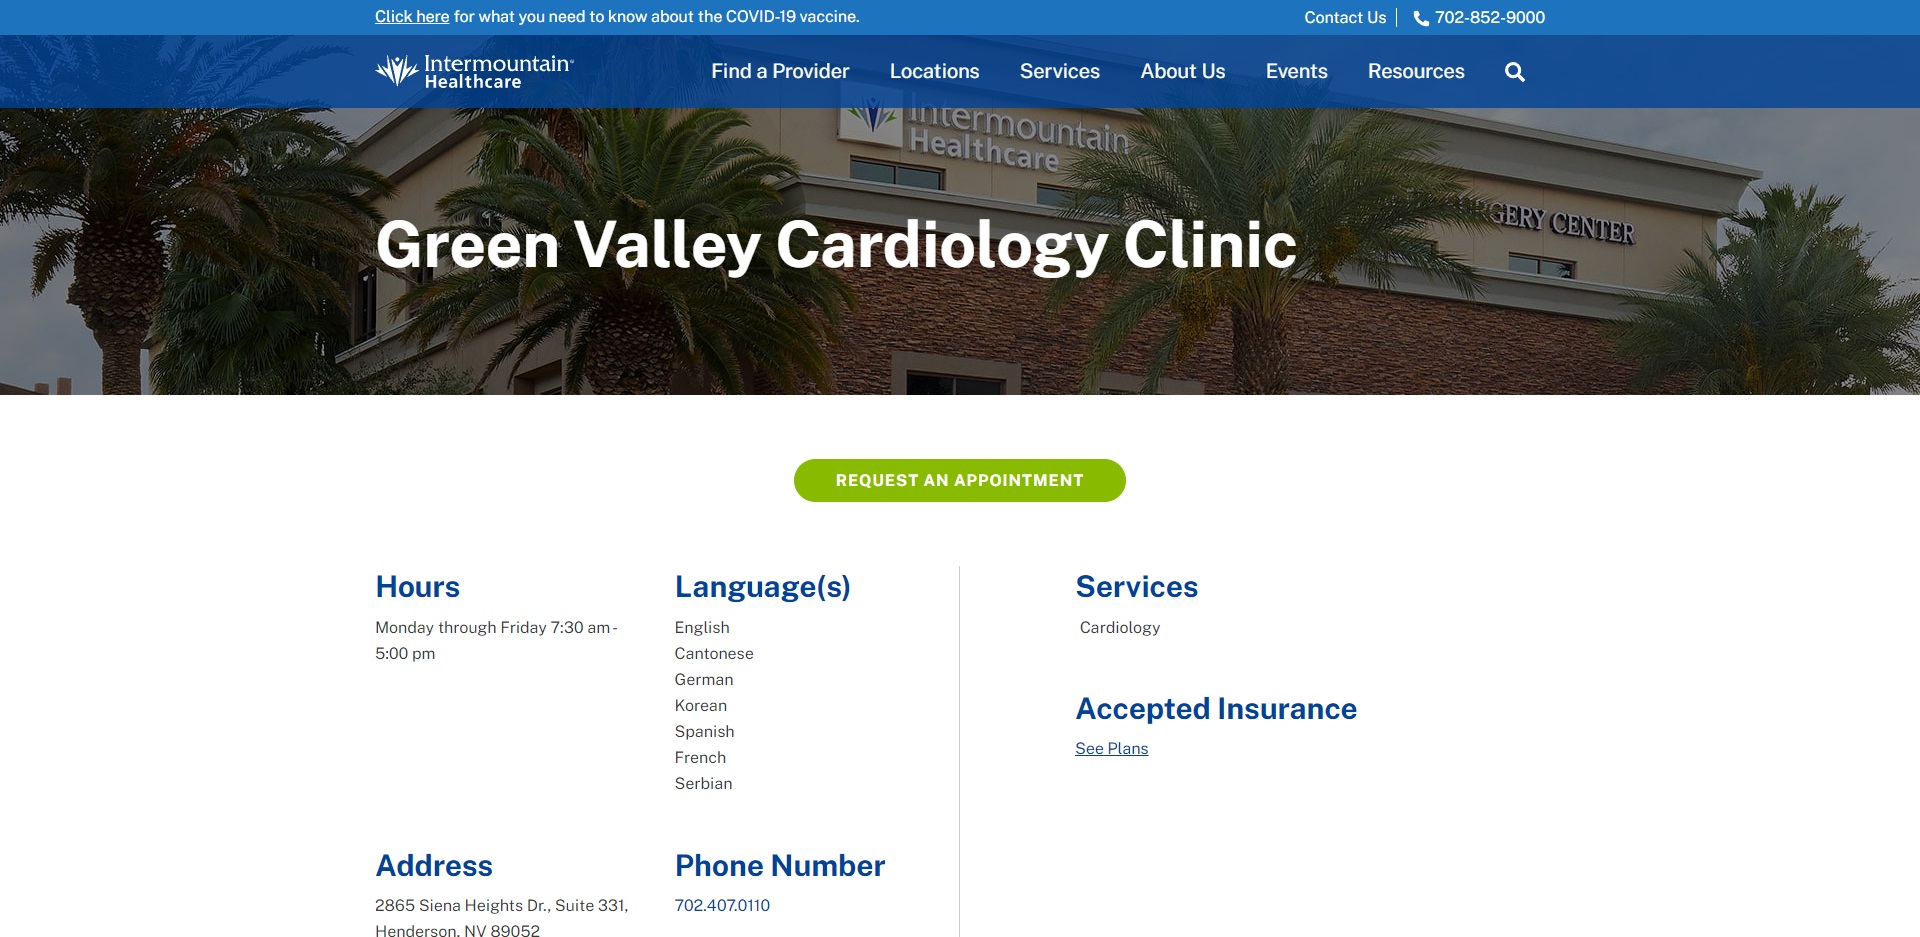 The Best Cardiologists in Henderson, NV